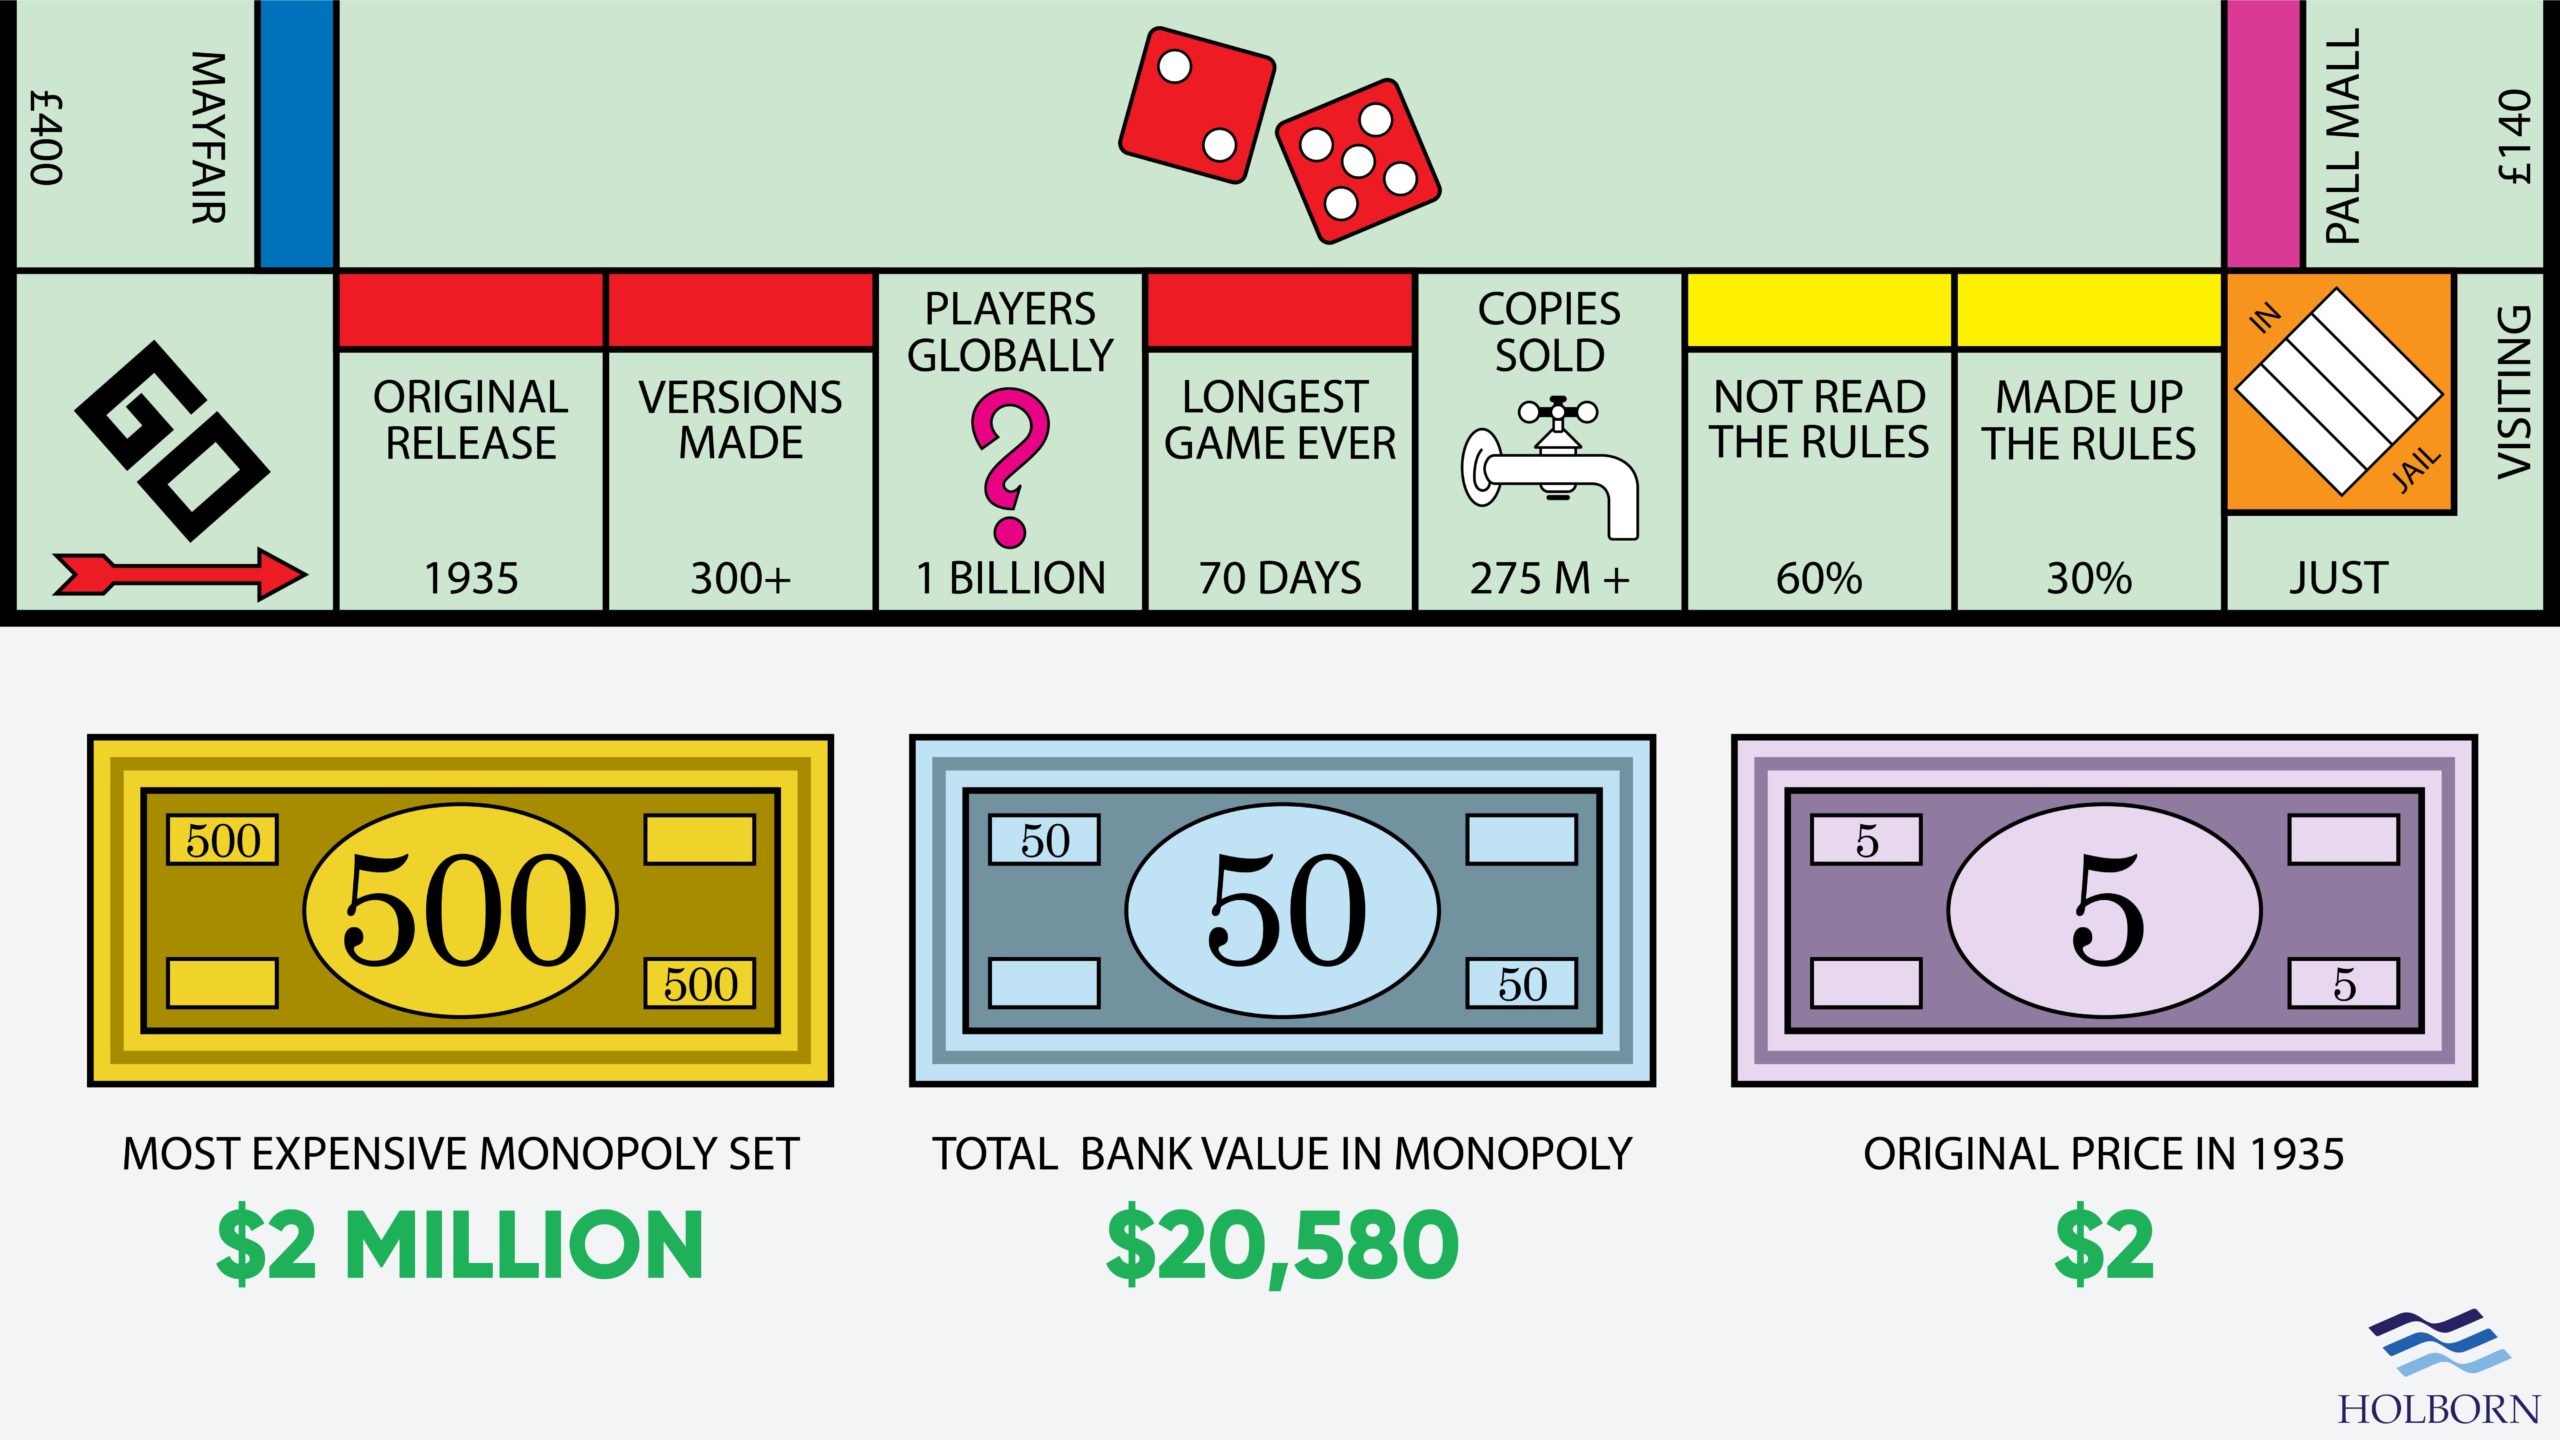 Monopoly stats and facts